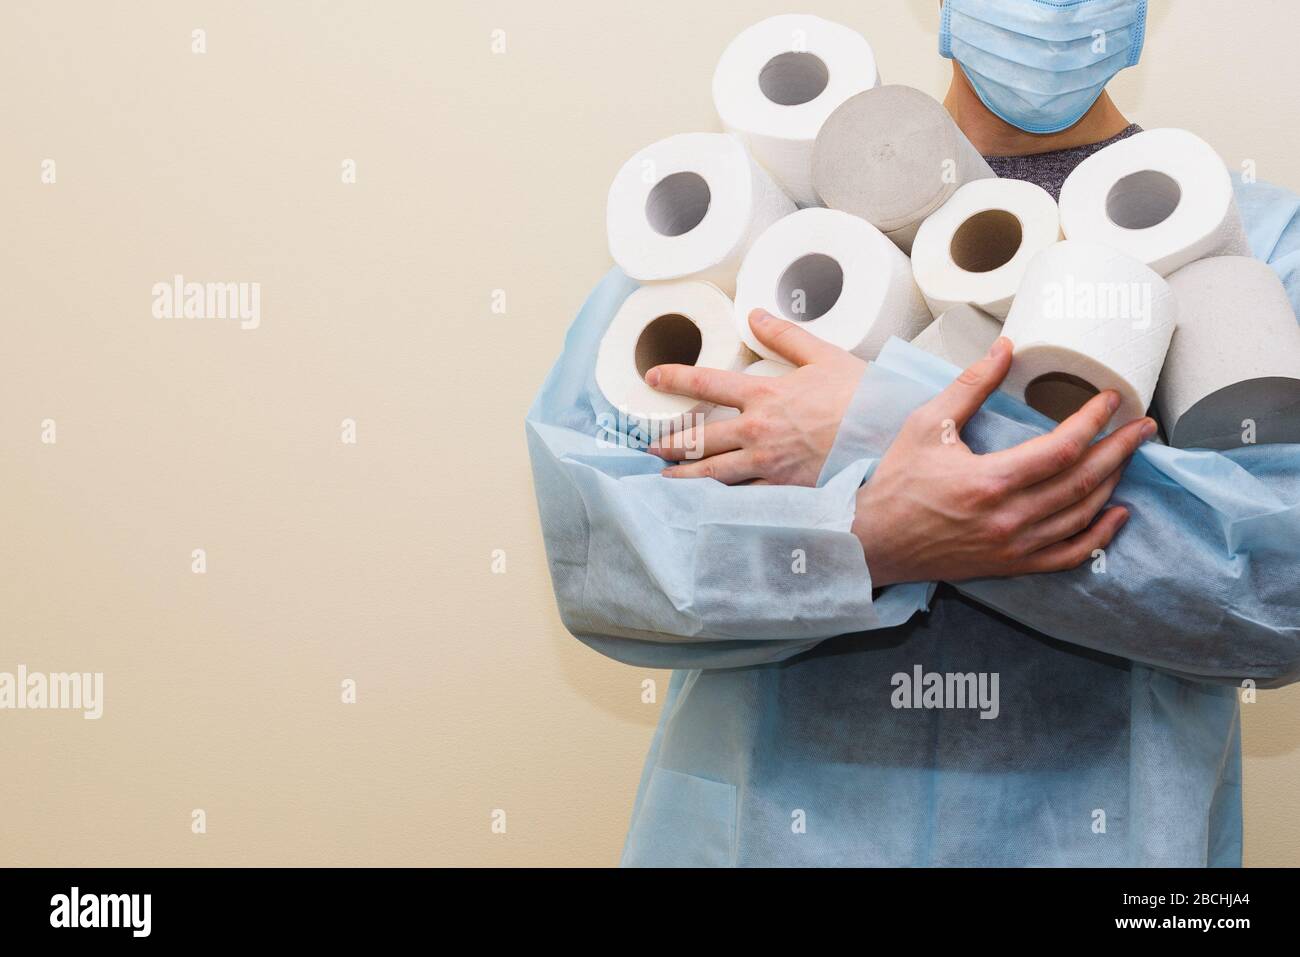 Panic over the Covid 19 pandemic. Buying toilet paper Stock Photo